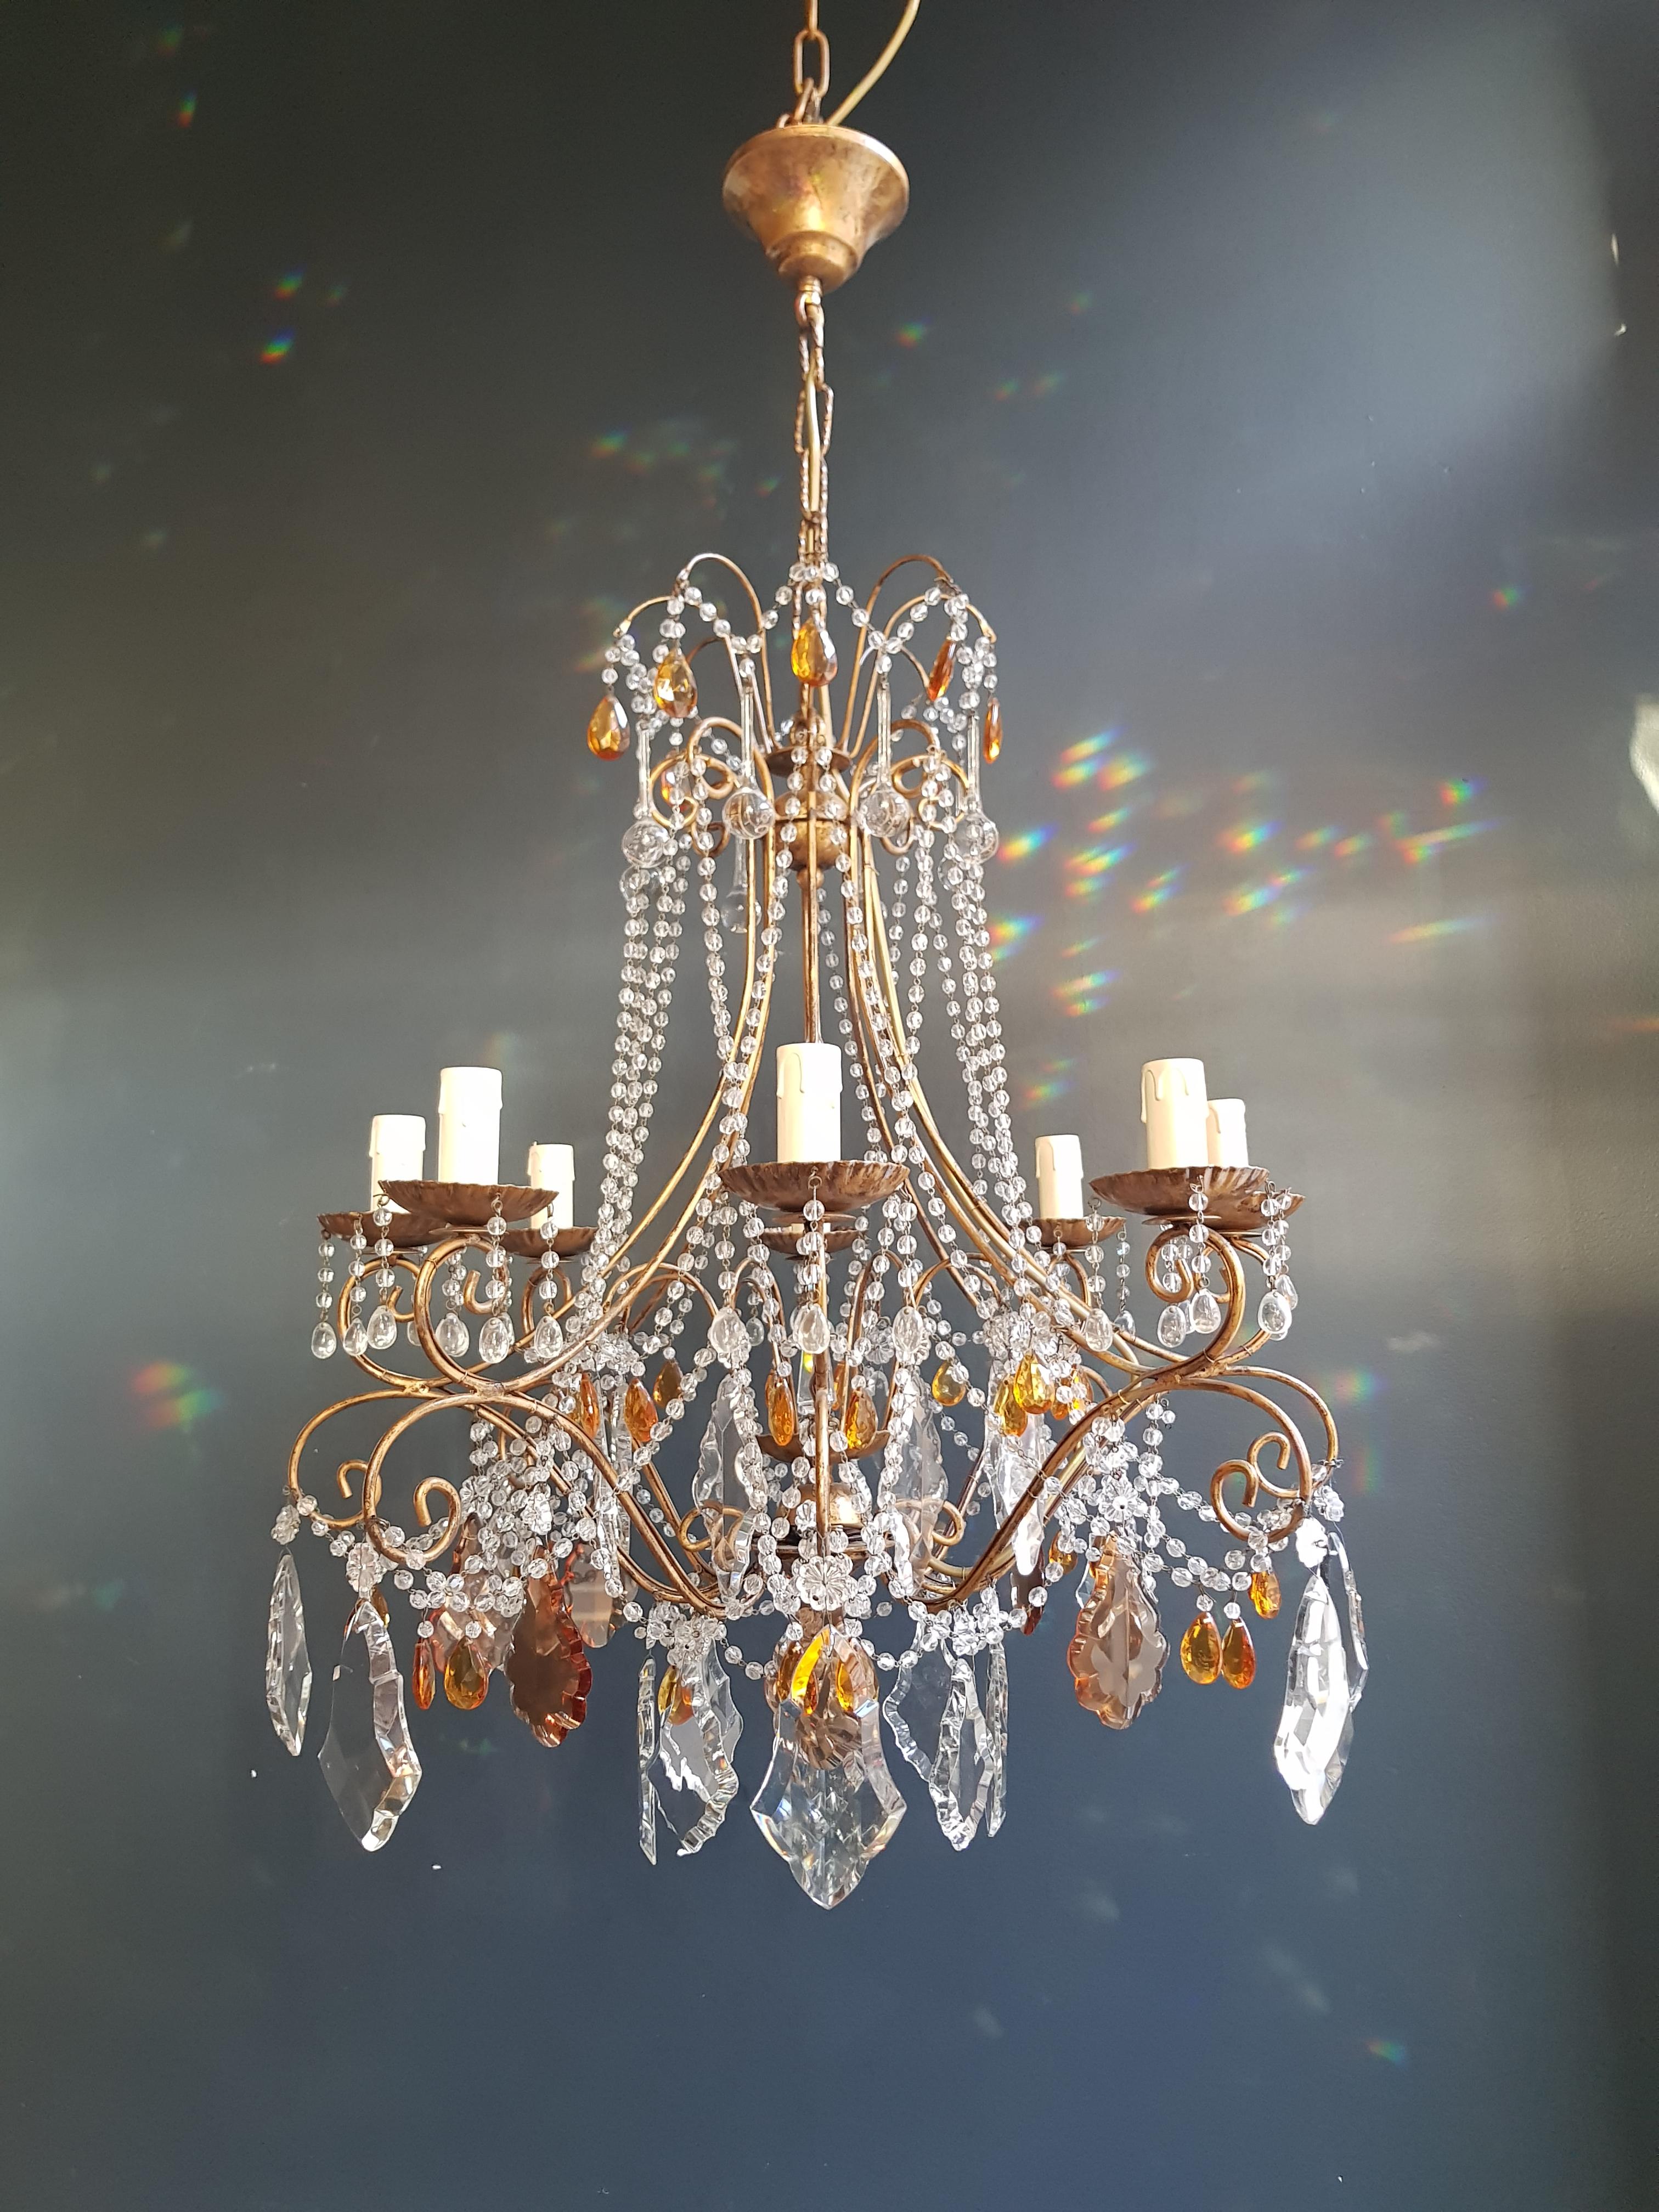 Amber Crystal Chandelier Antique Ceiling Murano Florentiner Lustre Art Nouveau In Good Condition For Sale In Berlin, DE